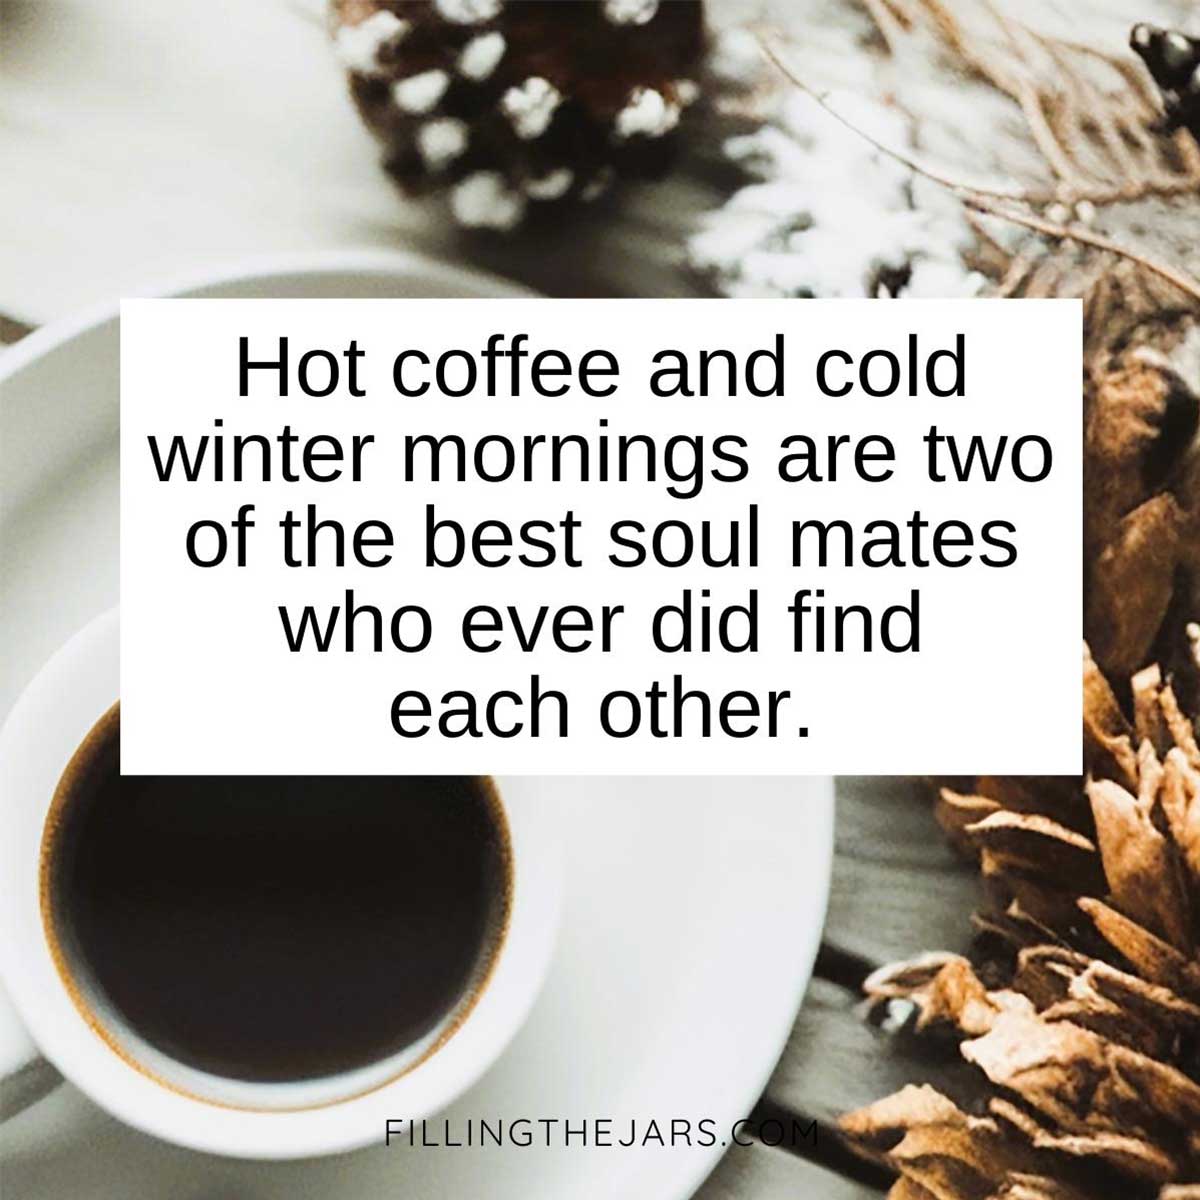 Coffee and winter morning quote in black text on white background over flatlay of coffee and winter pinecones on white table.